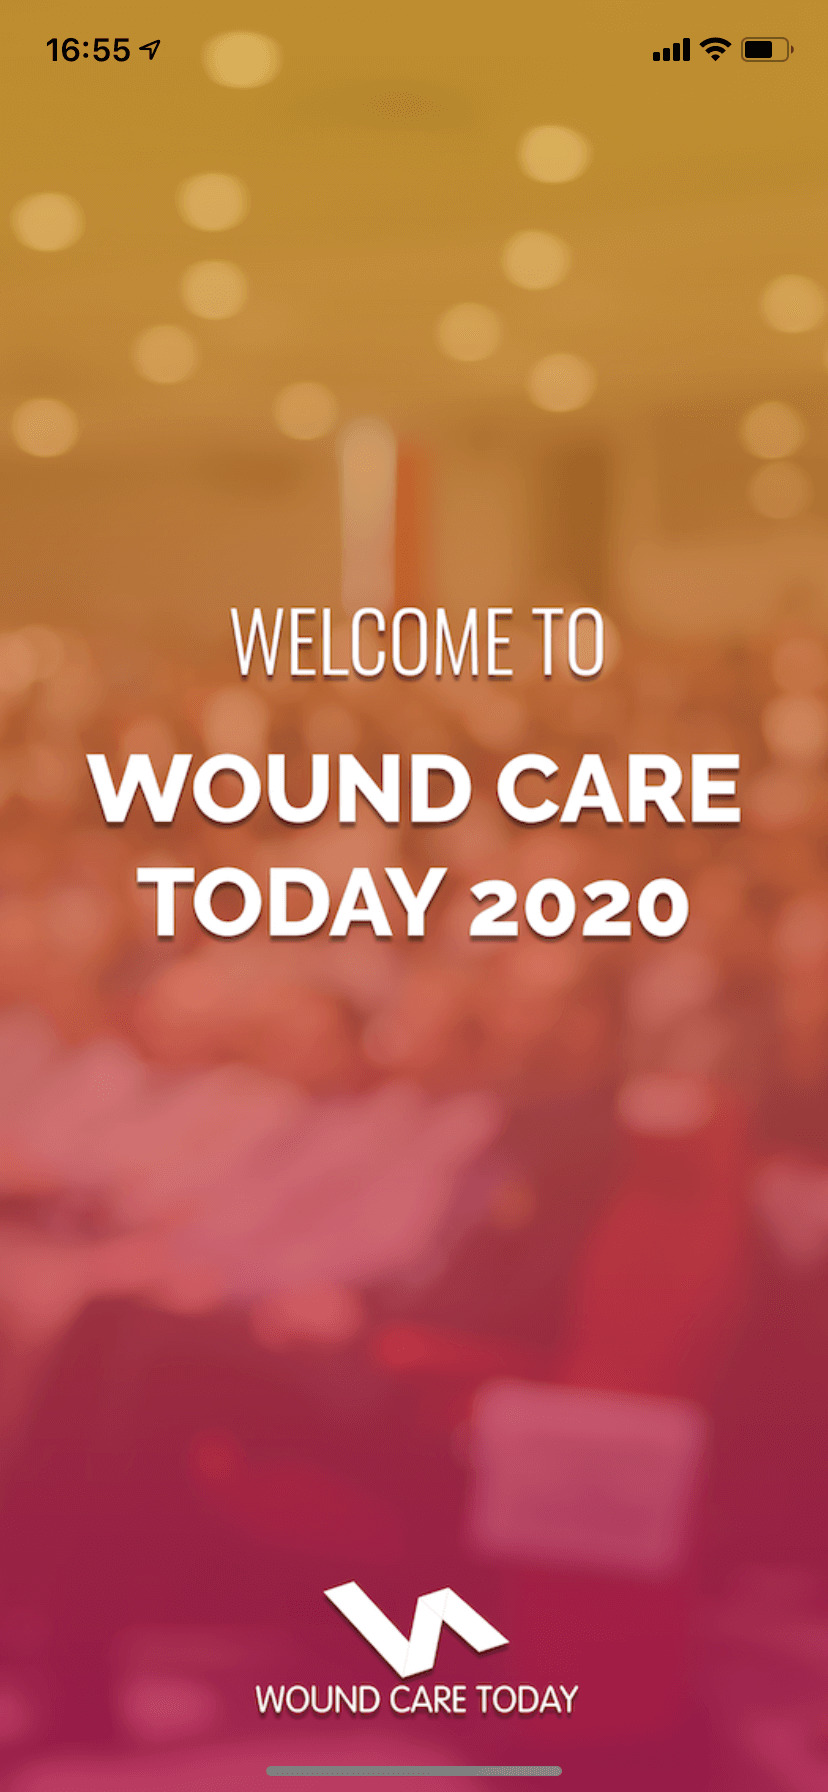 Wound Care 2020 branded splash screen in event app created with Event Builder by VenuIQ